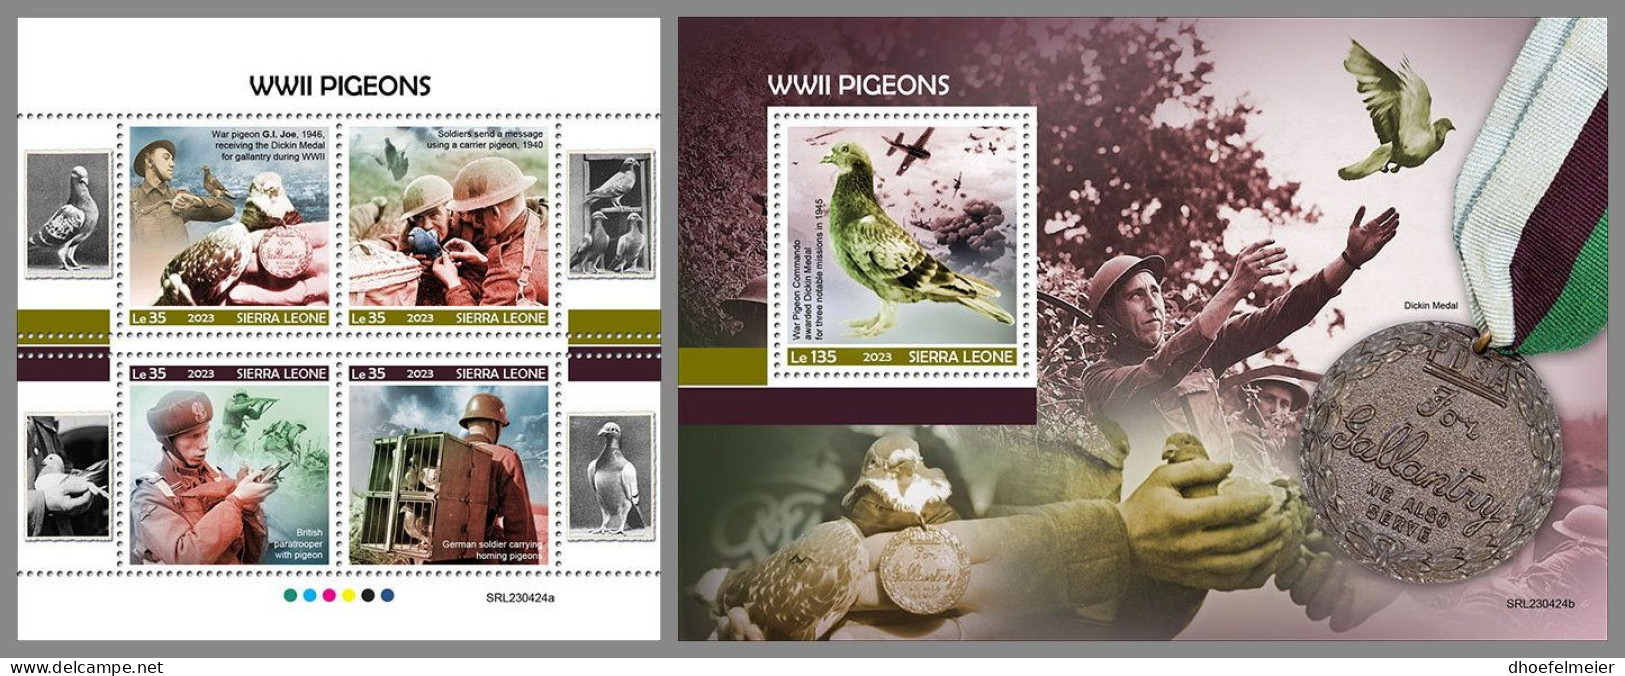 SIERRA LEONE 2023 MNH WWII Pigeons Tauben M/S+S/S – OFFICIAL ISSUE – DHQ2407 - Pigeons & Columbiformes